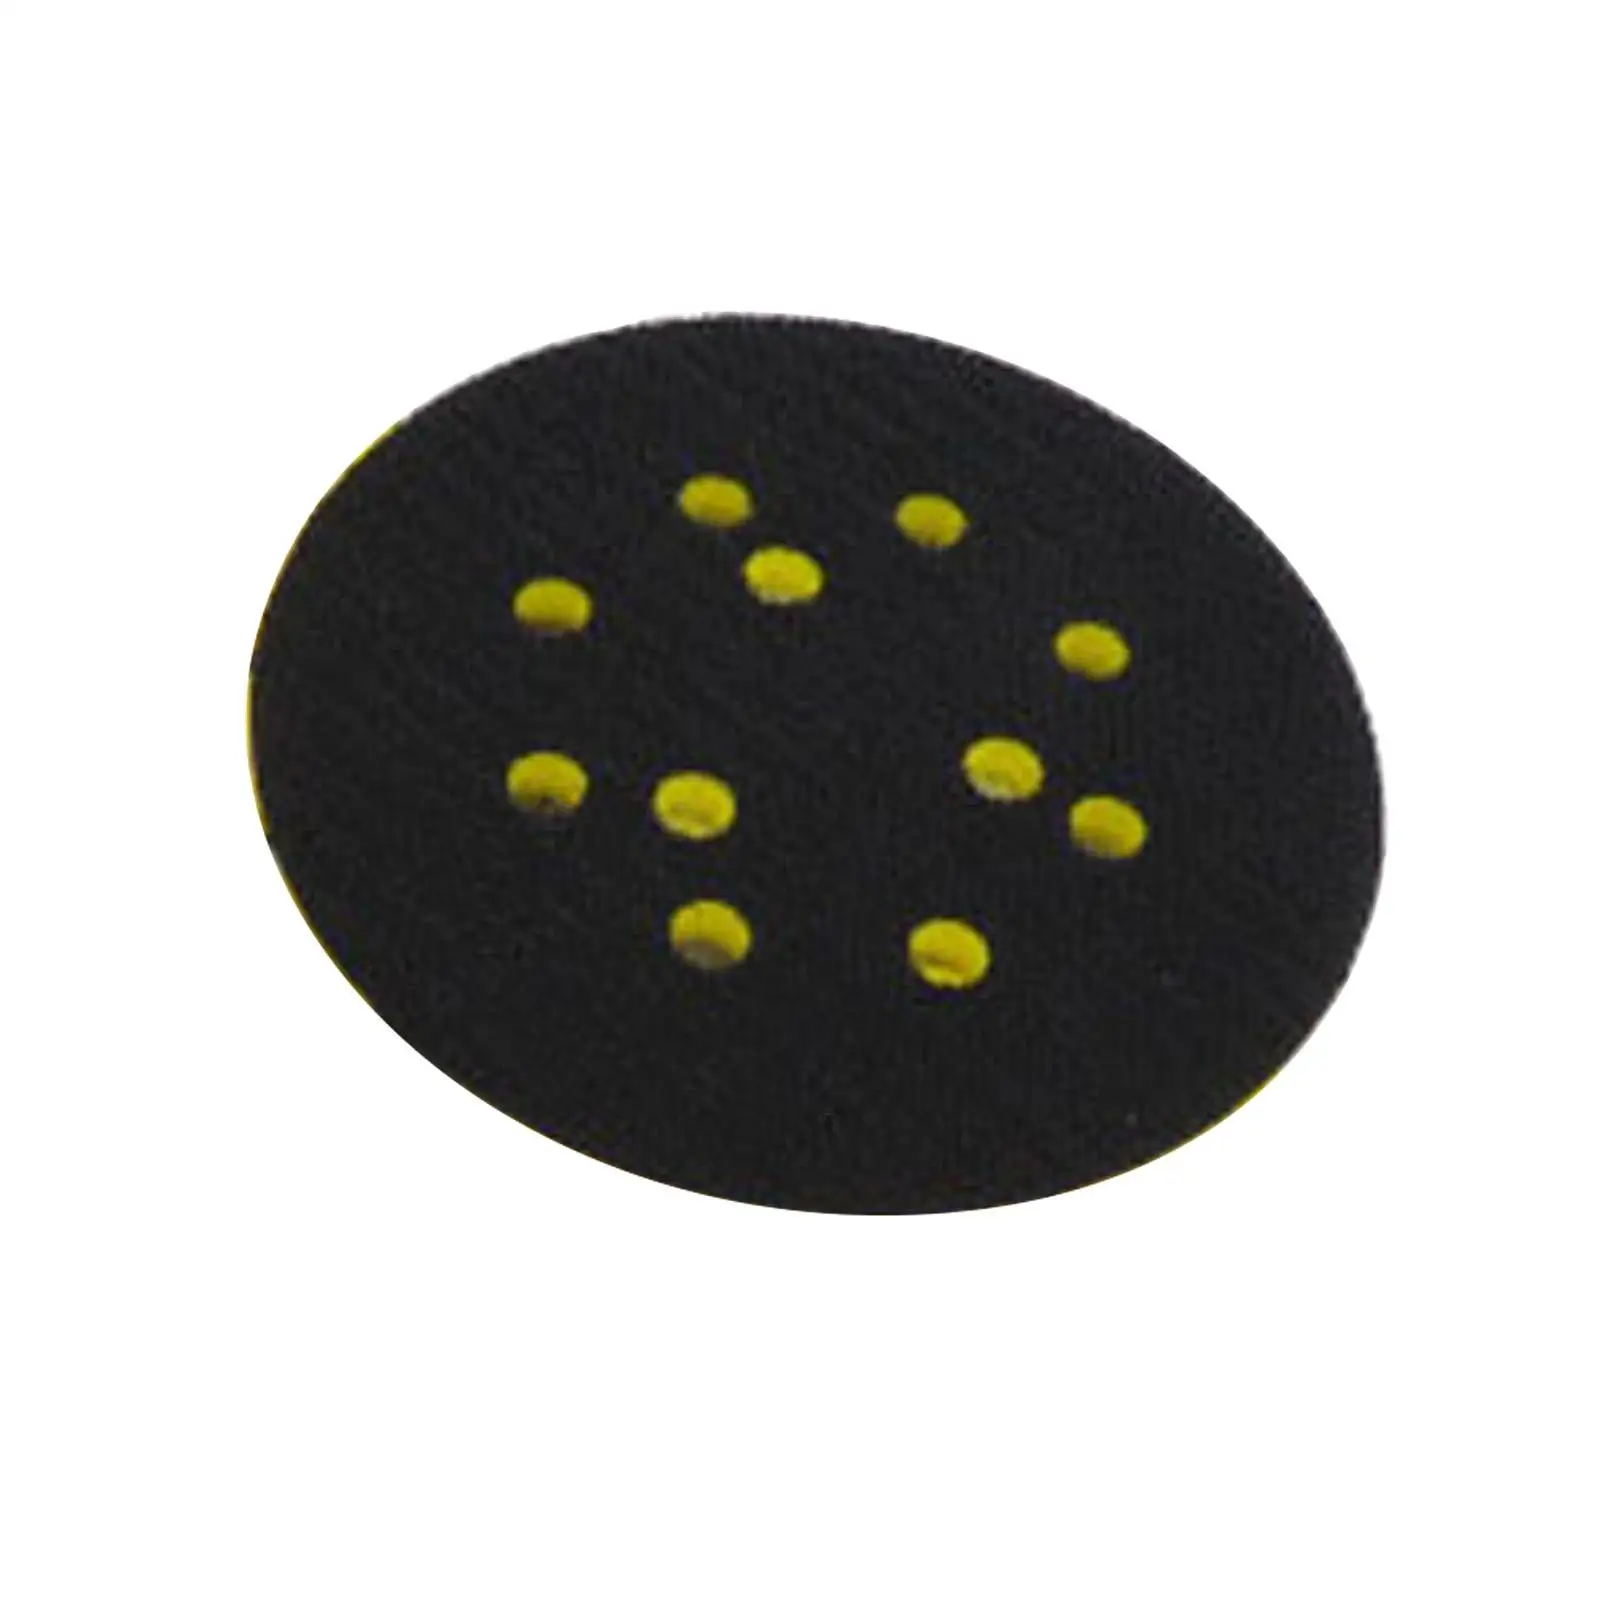 Sanding Disc Pad Durable Ventilation Grinding Plates for Woodworking Carving